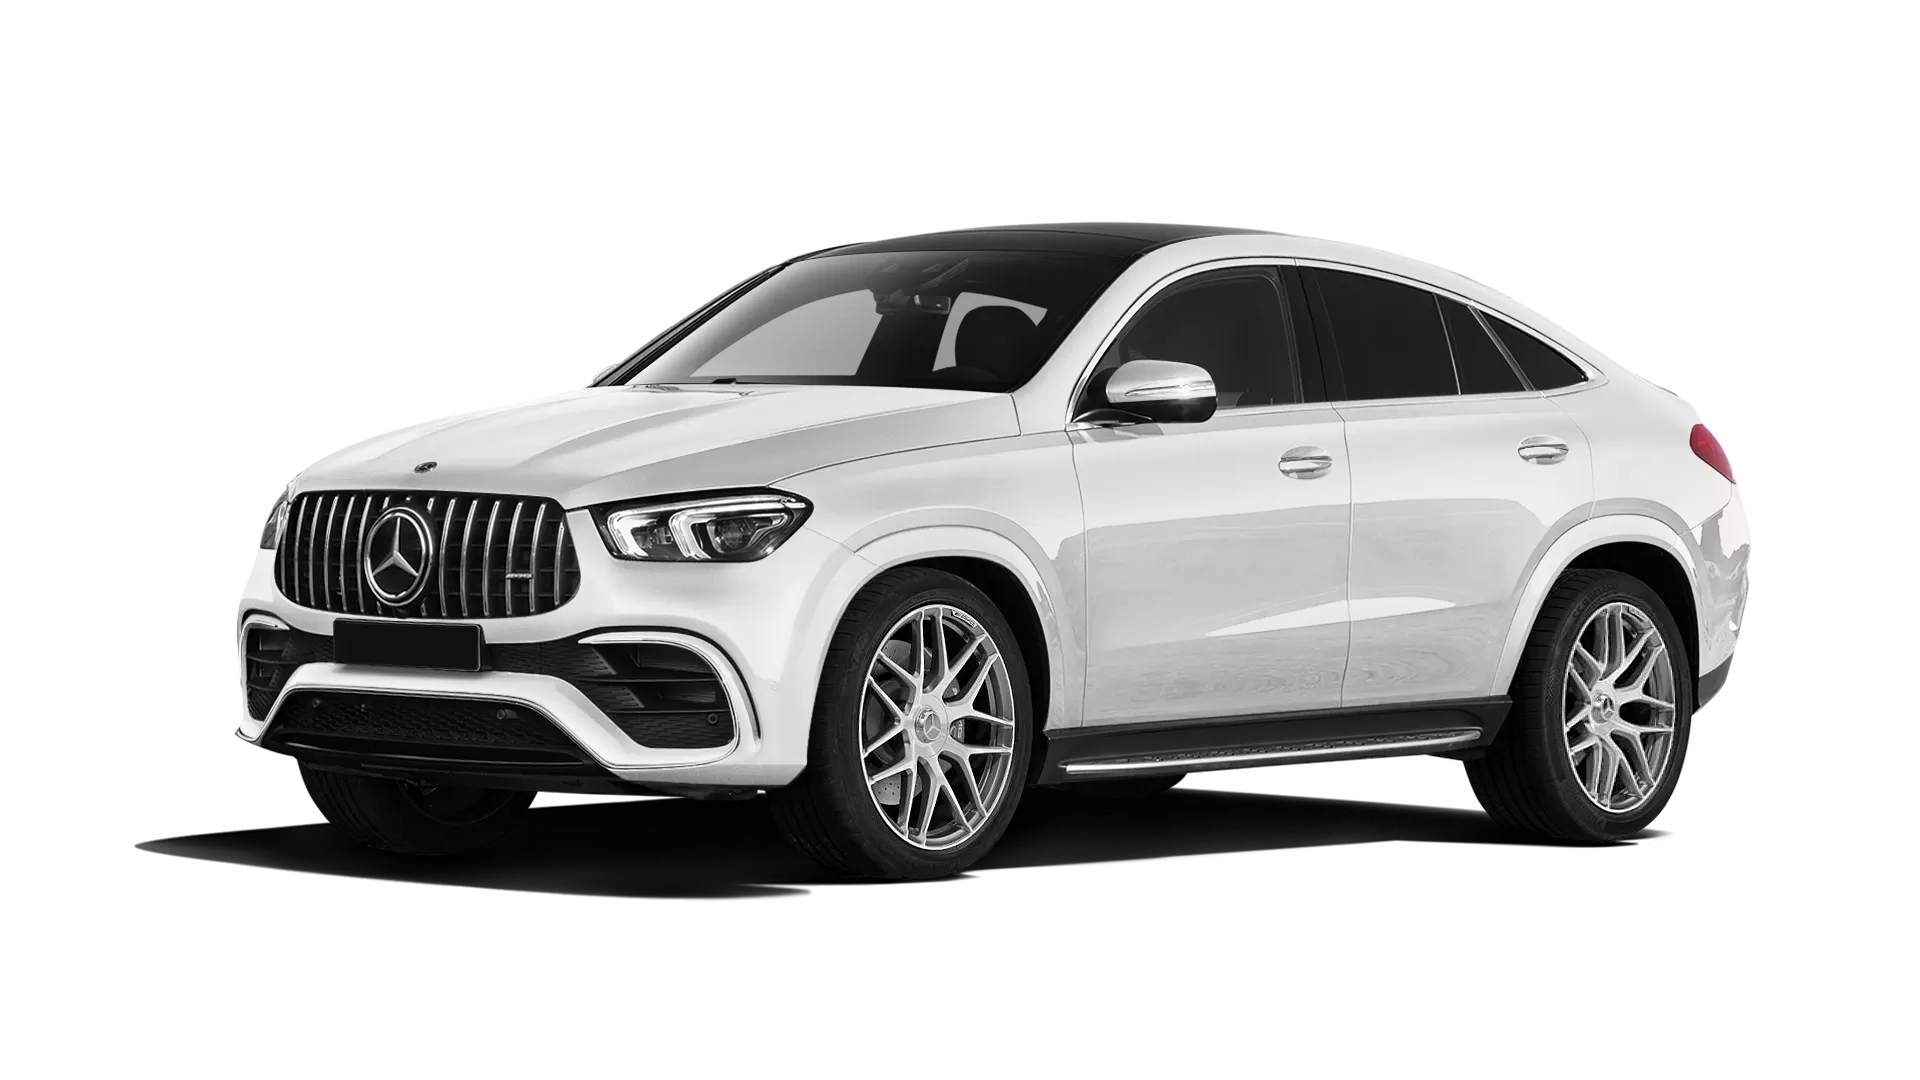 Mercedes GLE Coupe AMG 63 C167 stock front view in Diamond White color